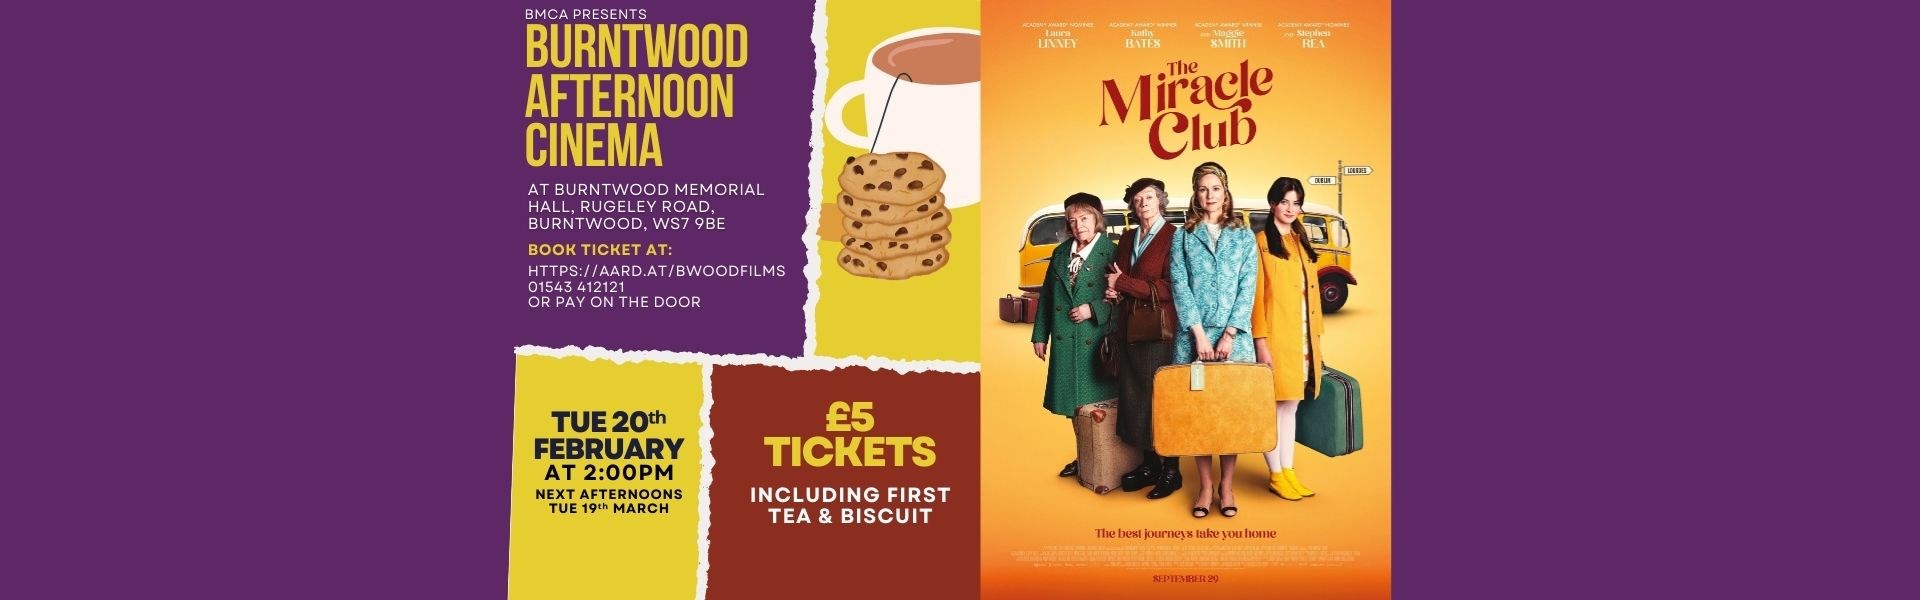 Burntwood Afternoon Cinema - The Miracle Club